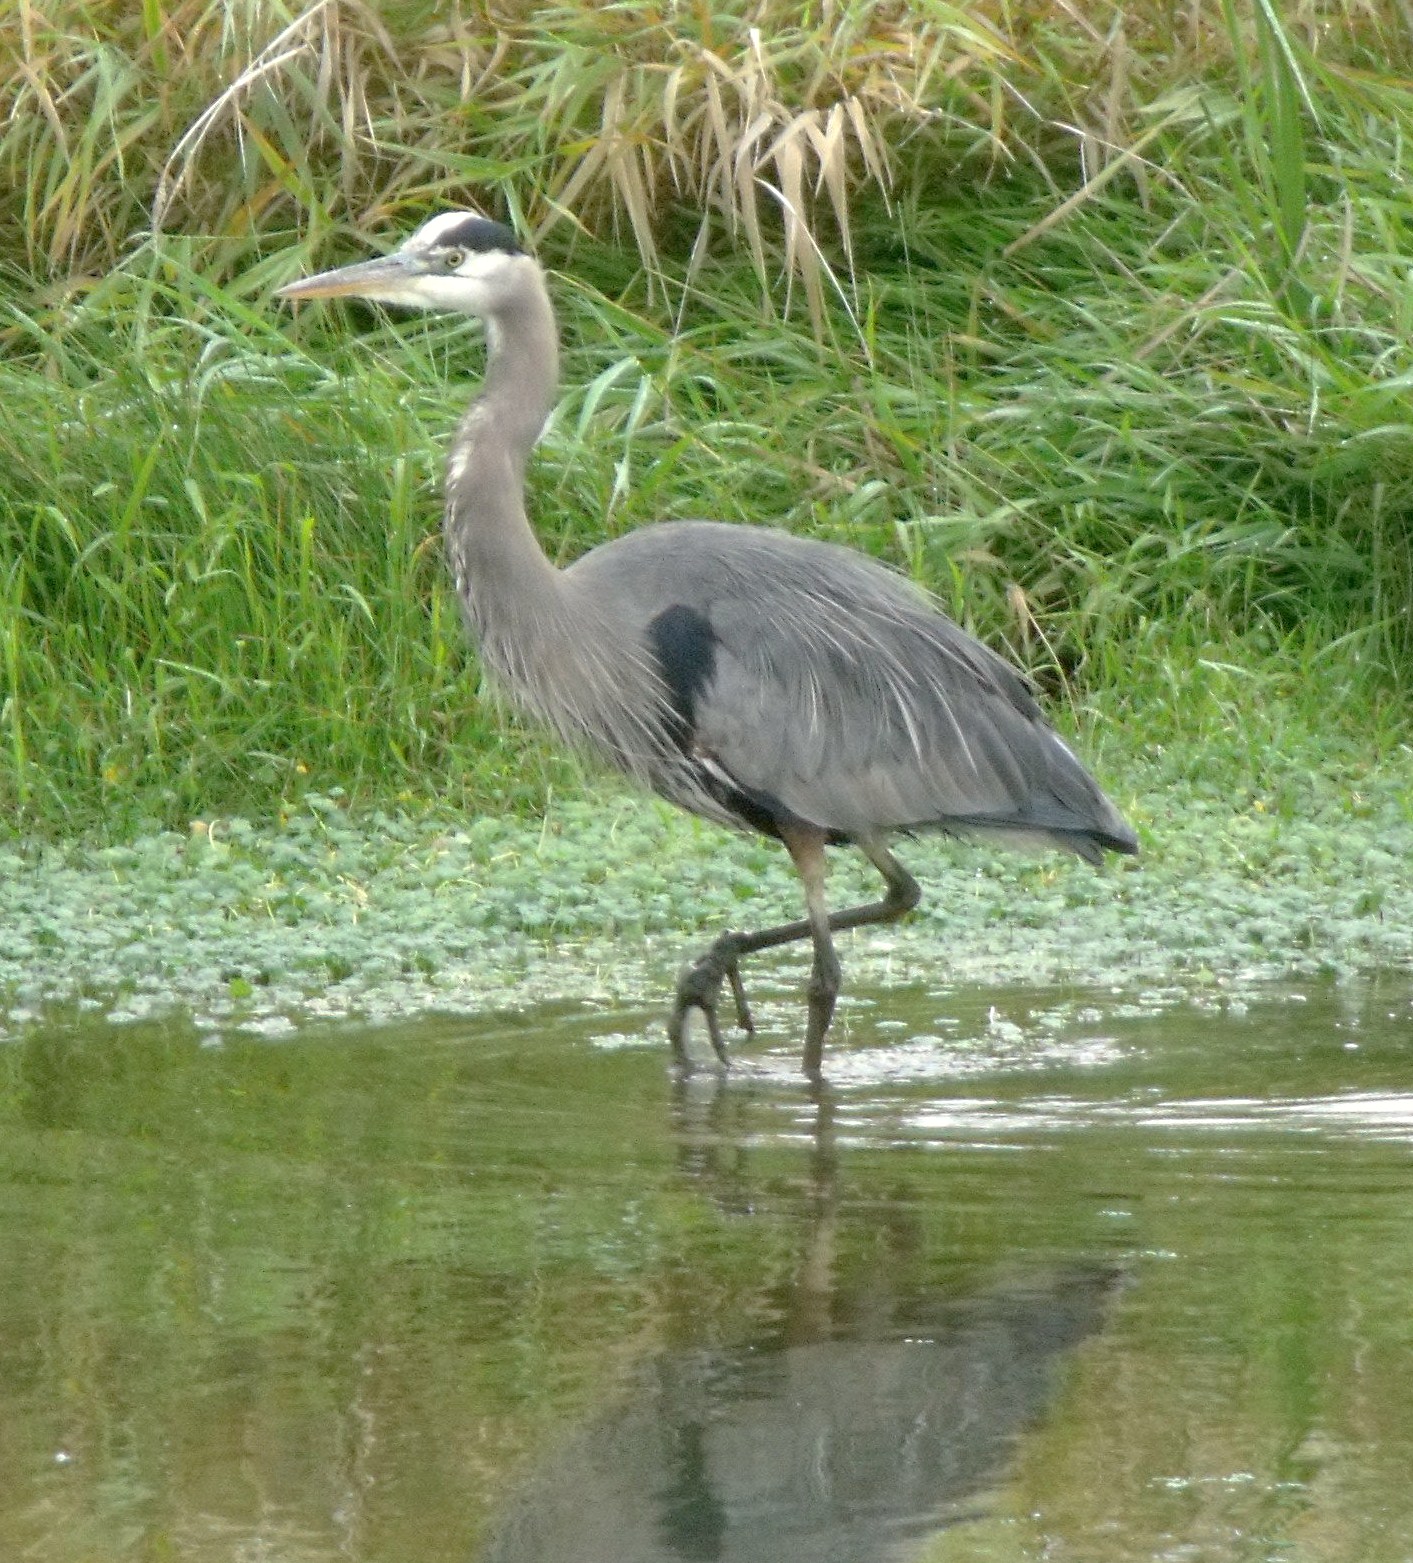 a grey heron standing in shallow water near grass